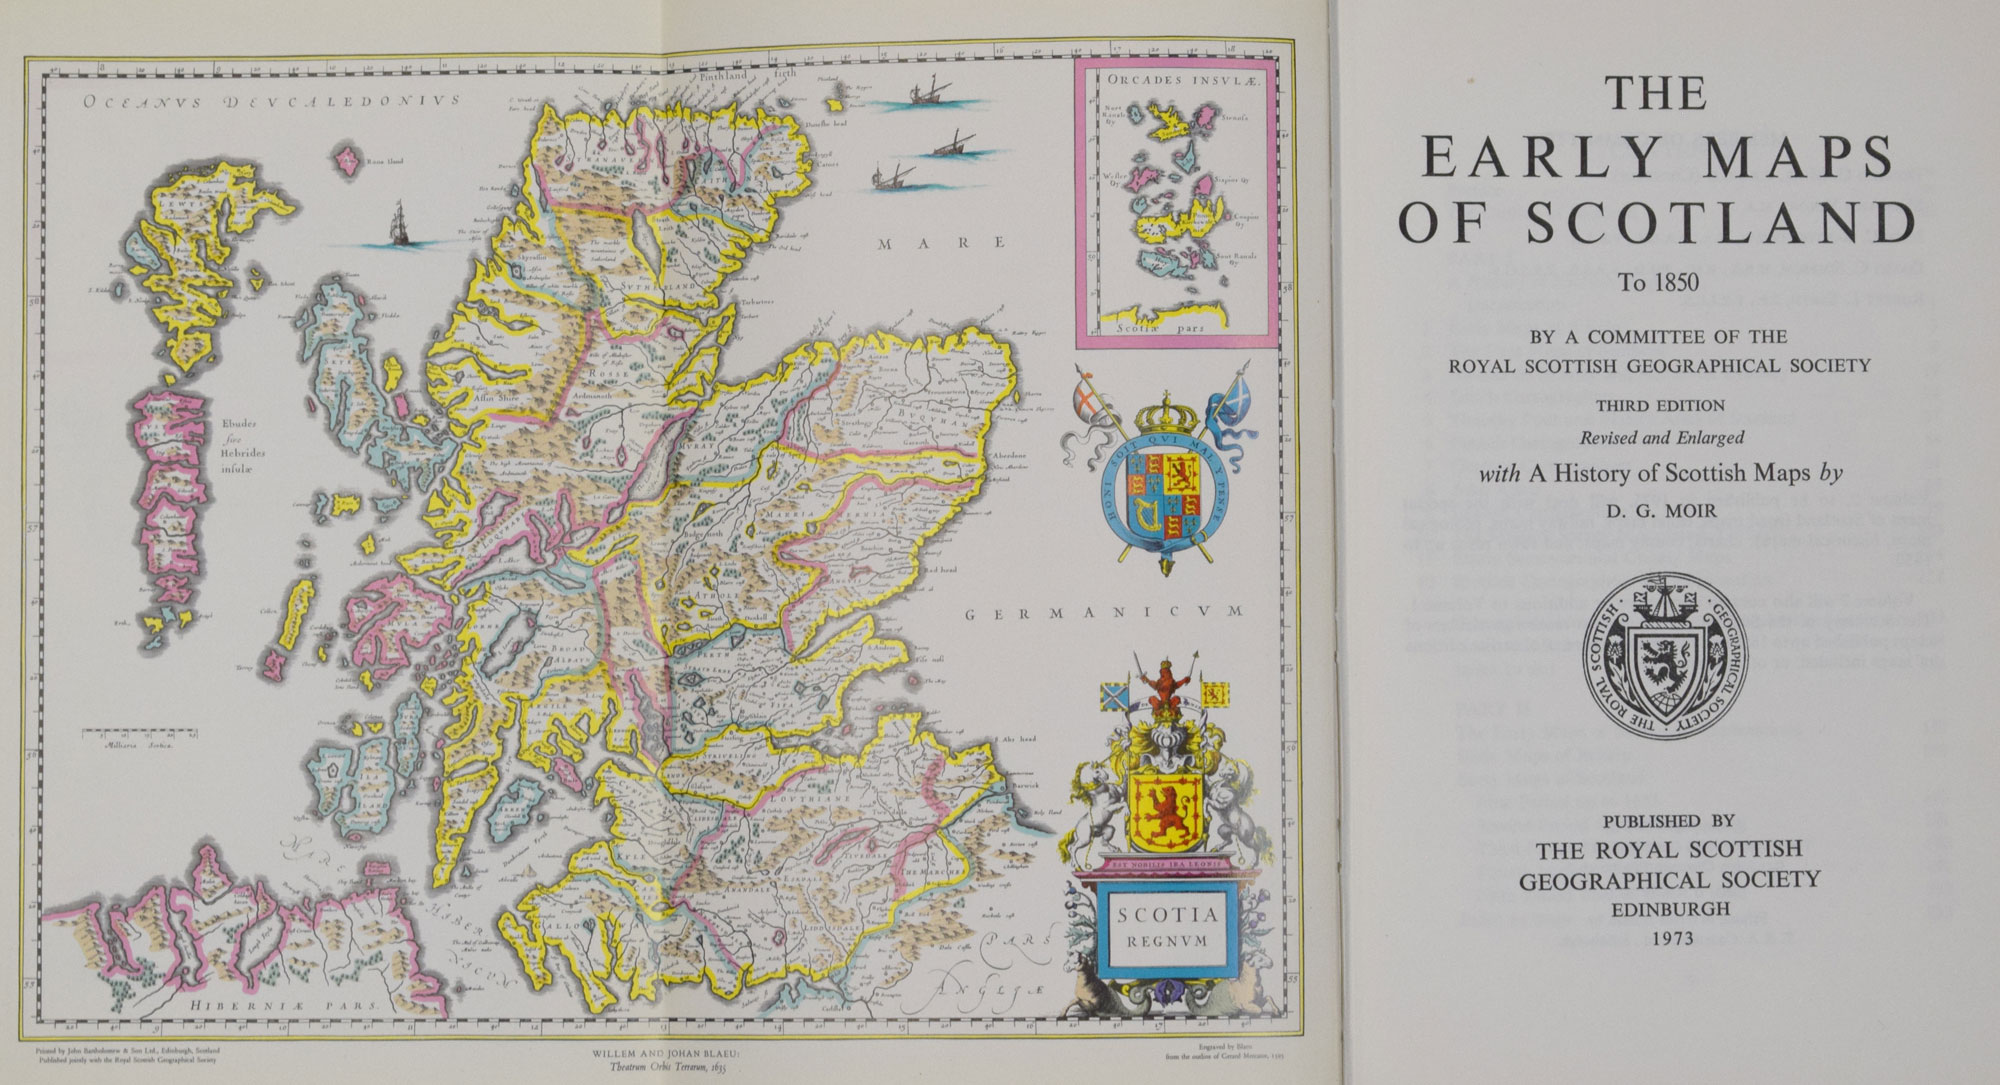 The Early Maps of Scotland to 1850.  Volume I [of II]